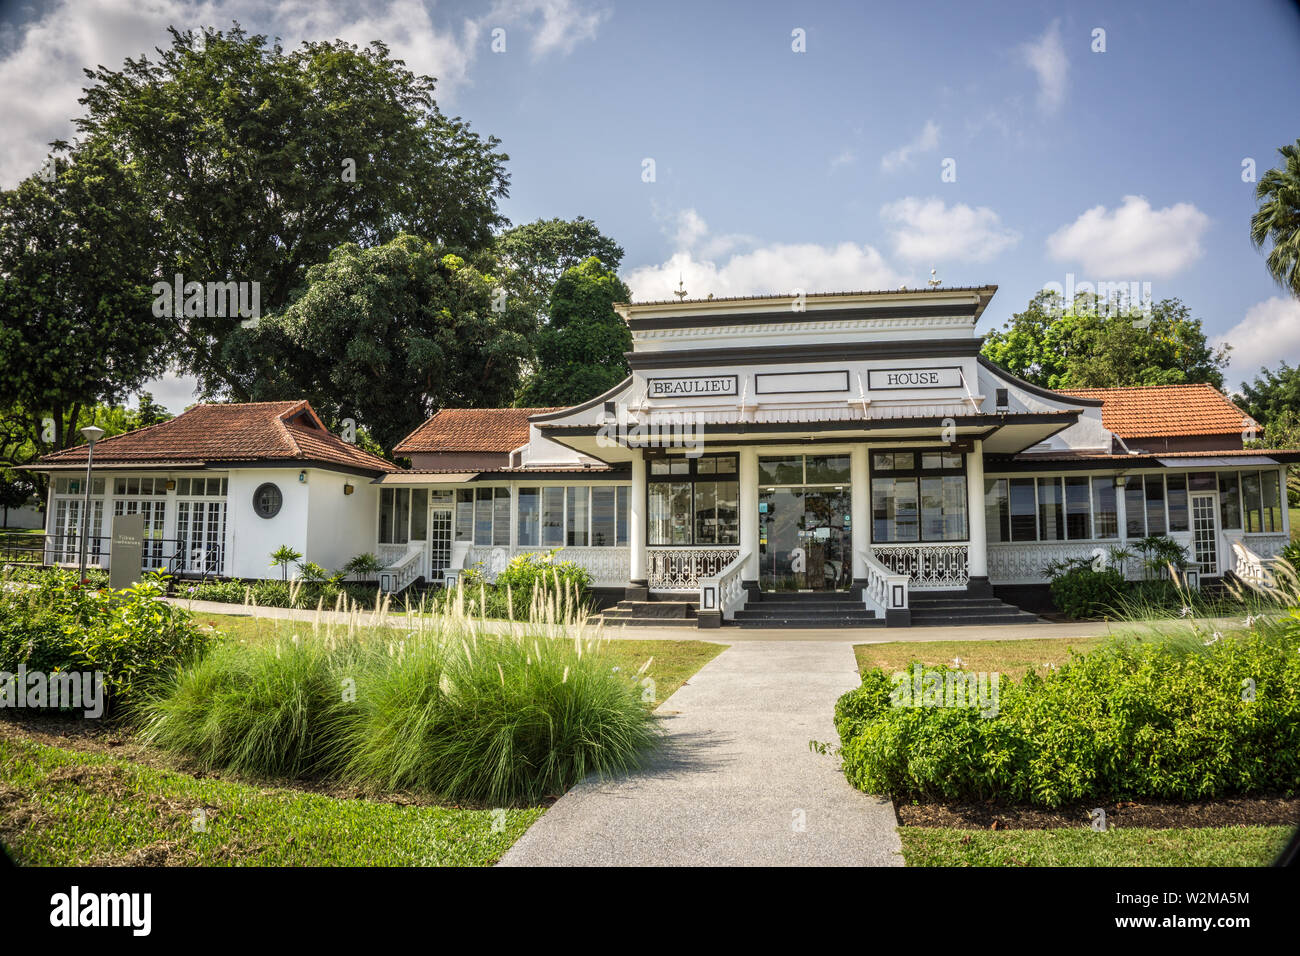 Singapore - Sept 30, 2018: Beaulieu House, built sometime in the 1910s, is located at Sembawang Park in Singapore, overlooking the Straits of Johor. Stock Photo